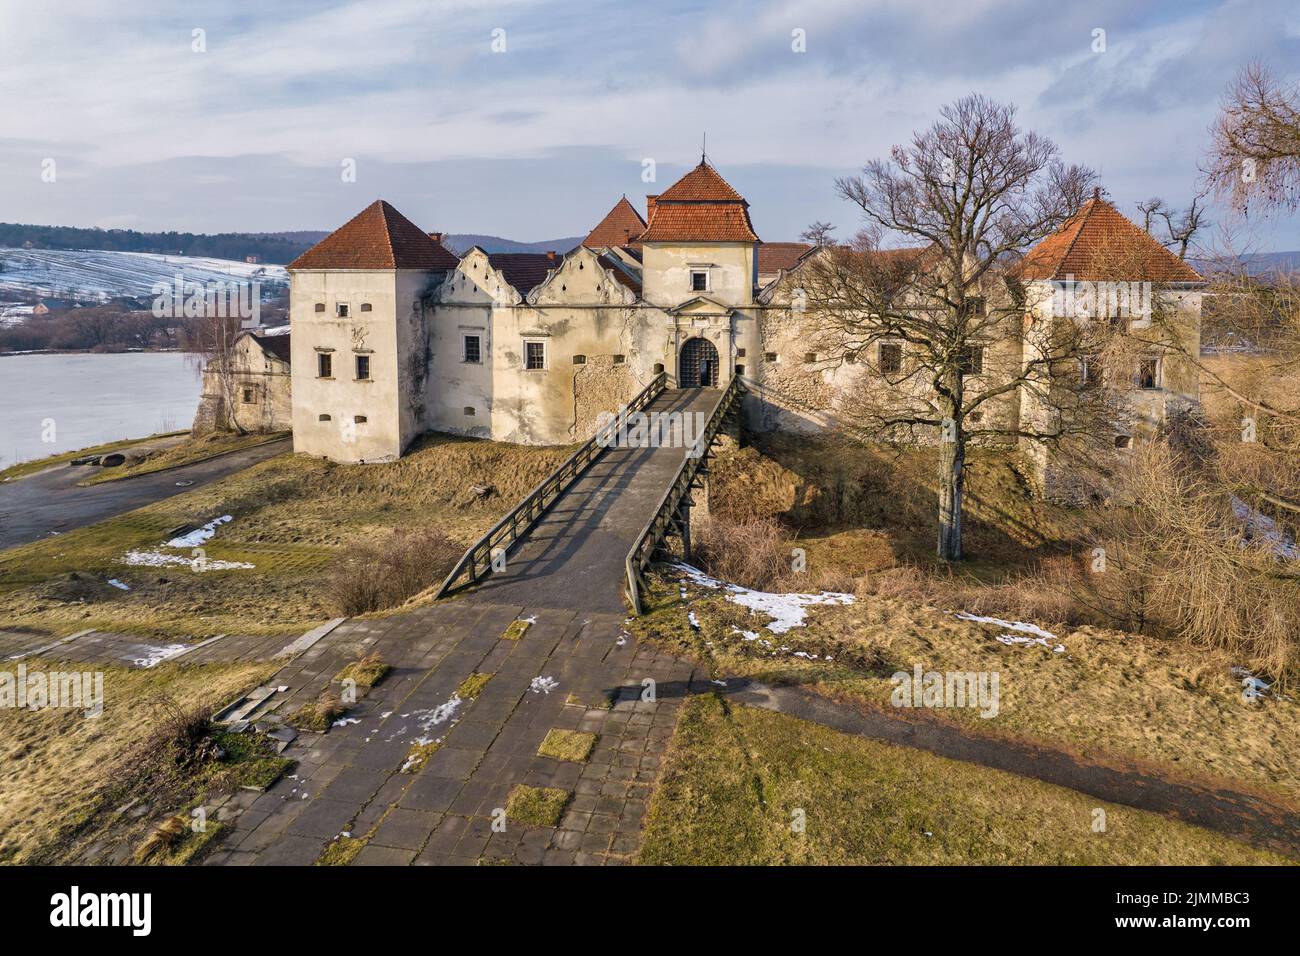 Aerial view over Svirzh Castle, Ukraine. It is a fortified aristocratic residence in Lviv region, built in 15th century. Stock Photo